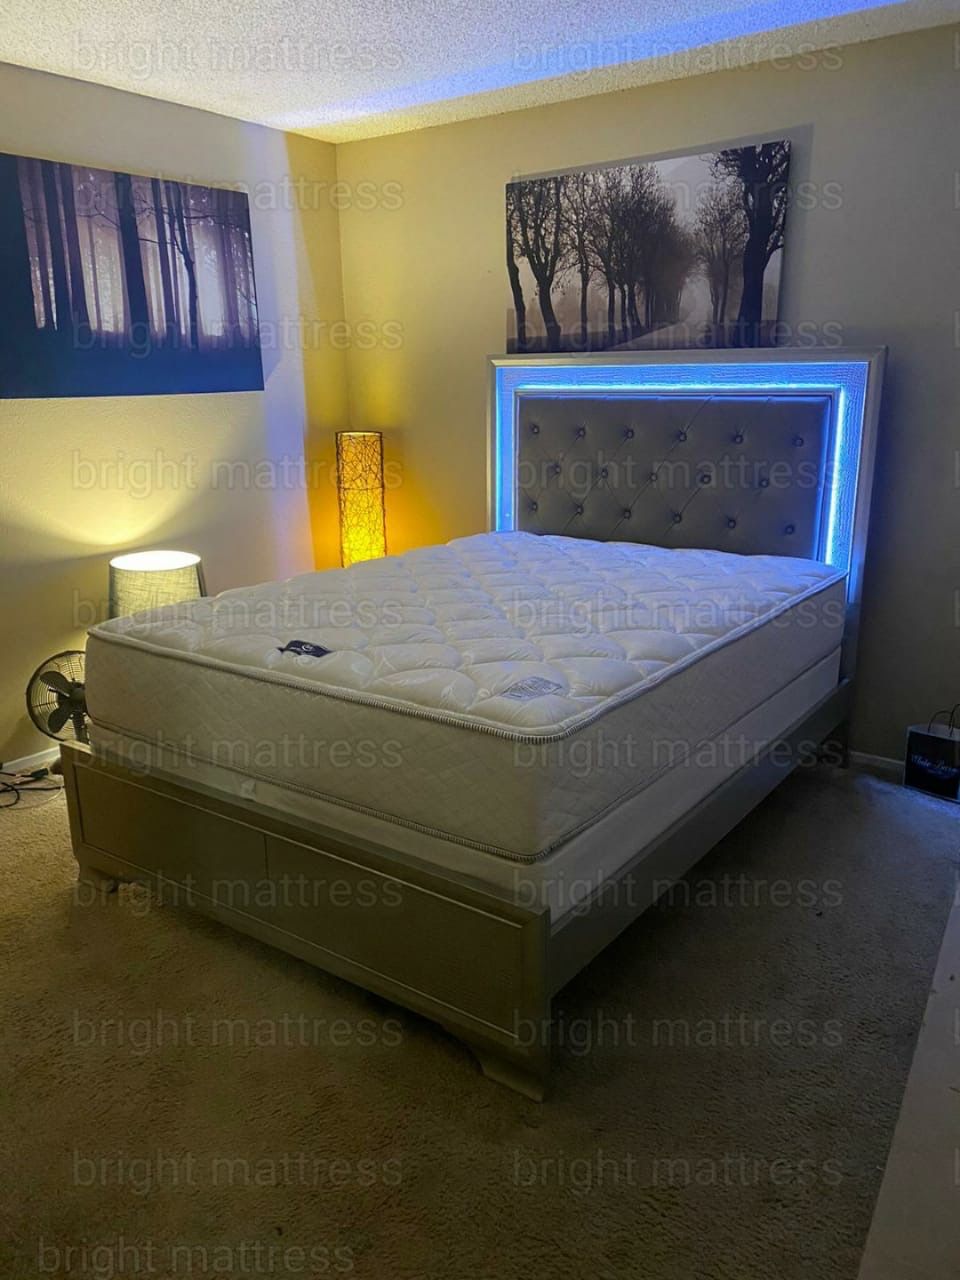 🛏 QUEEN BED FRAME LYSSA $475 WITH LED 💥Mattress NOT included 💥🌟